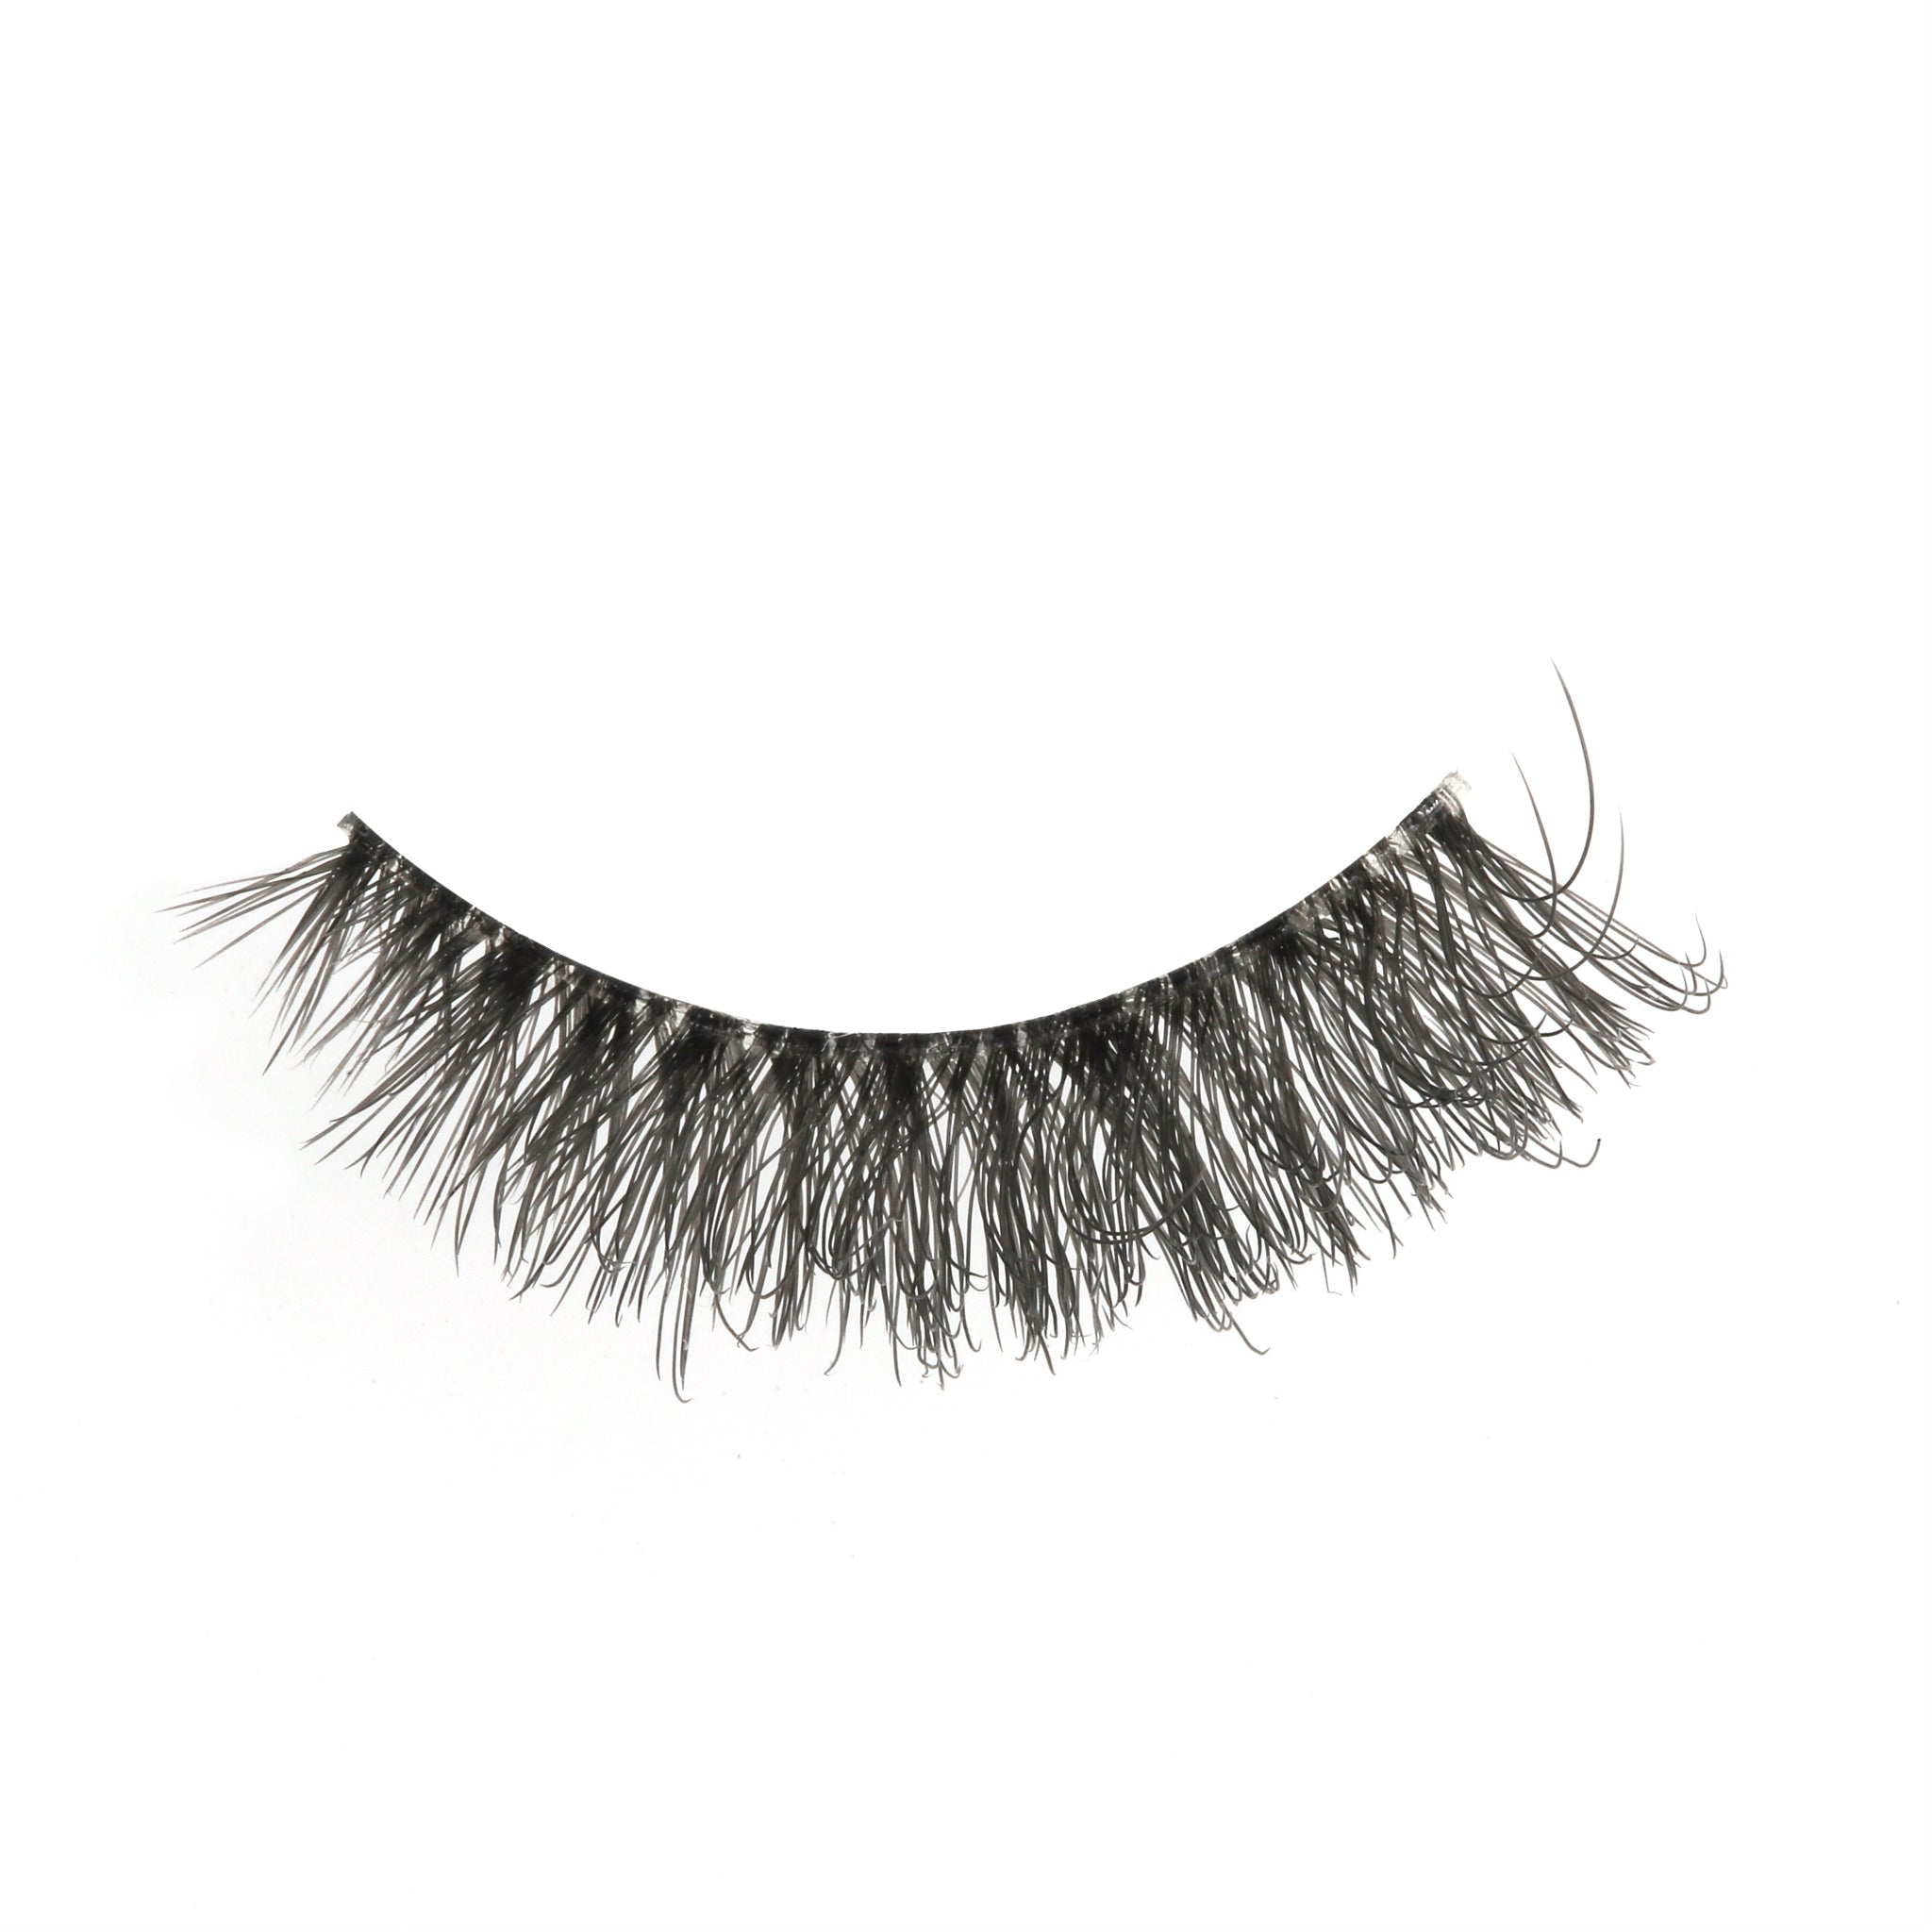 natural style lash strips, natural lash strip look, hand made lashes, full lash strips, volume style lash strips, strip lashes, false eyelashes, natural strip lash look, high quality strip lashes, volume style strip lashes, luxurious strip lashes, Biodegradable lashes